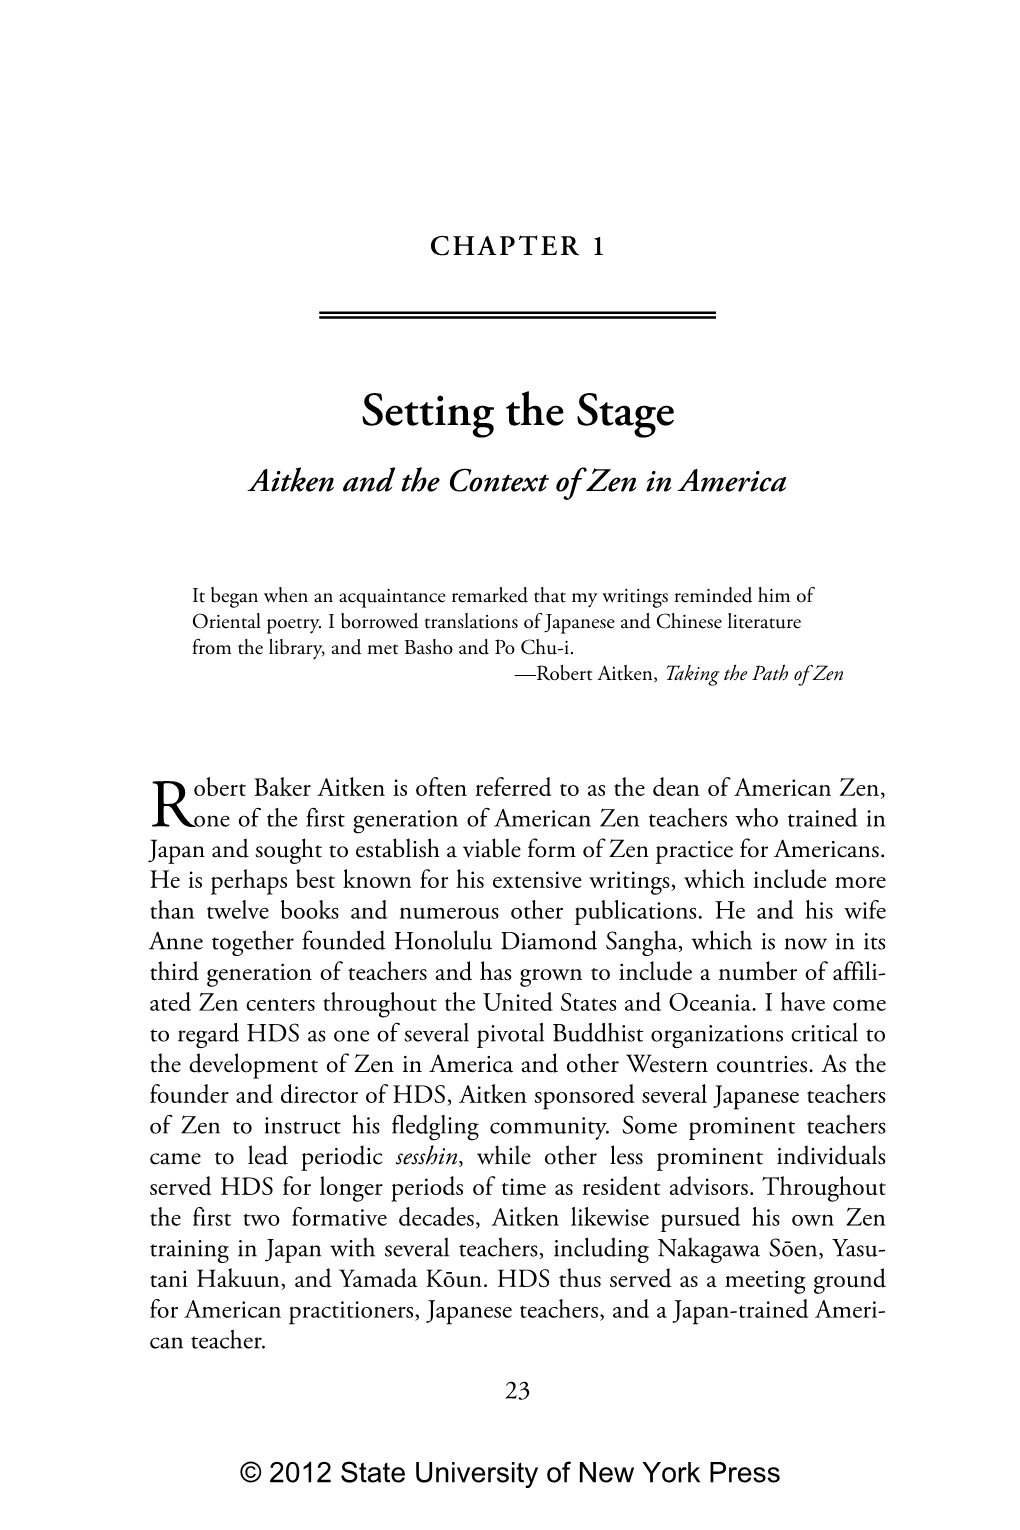 Setting the Stage Aitken and the Context of Zen in America